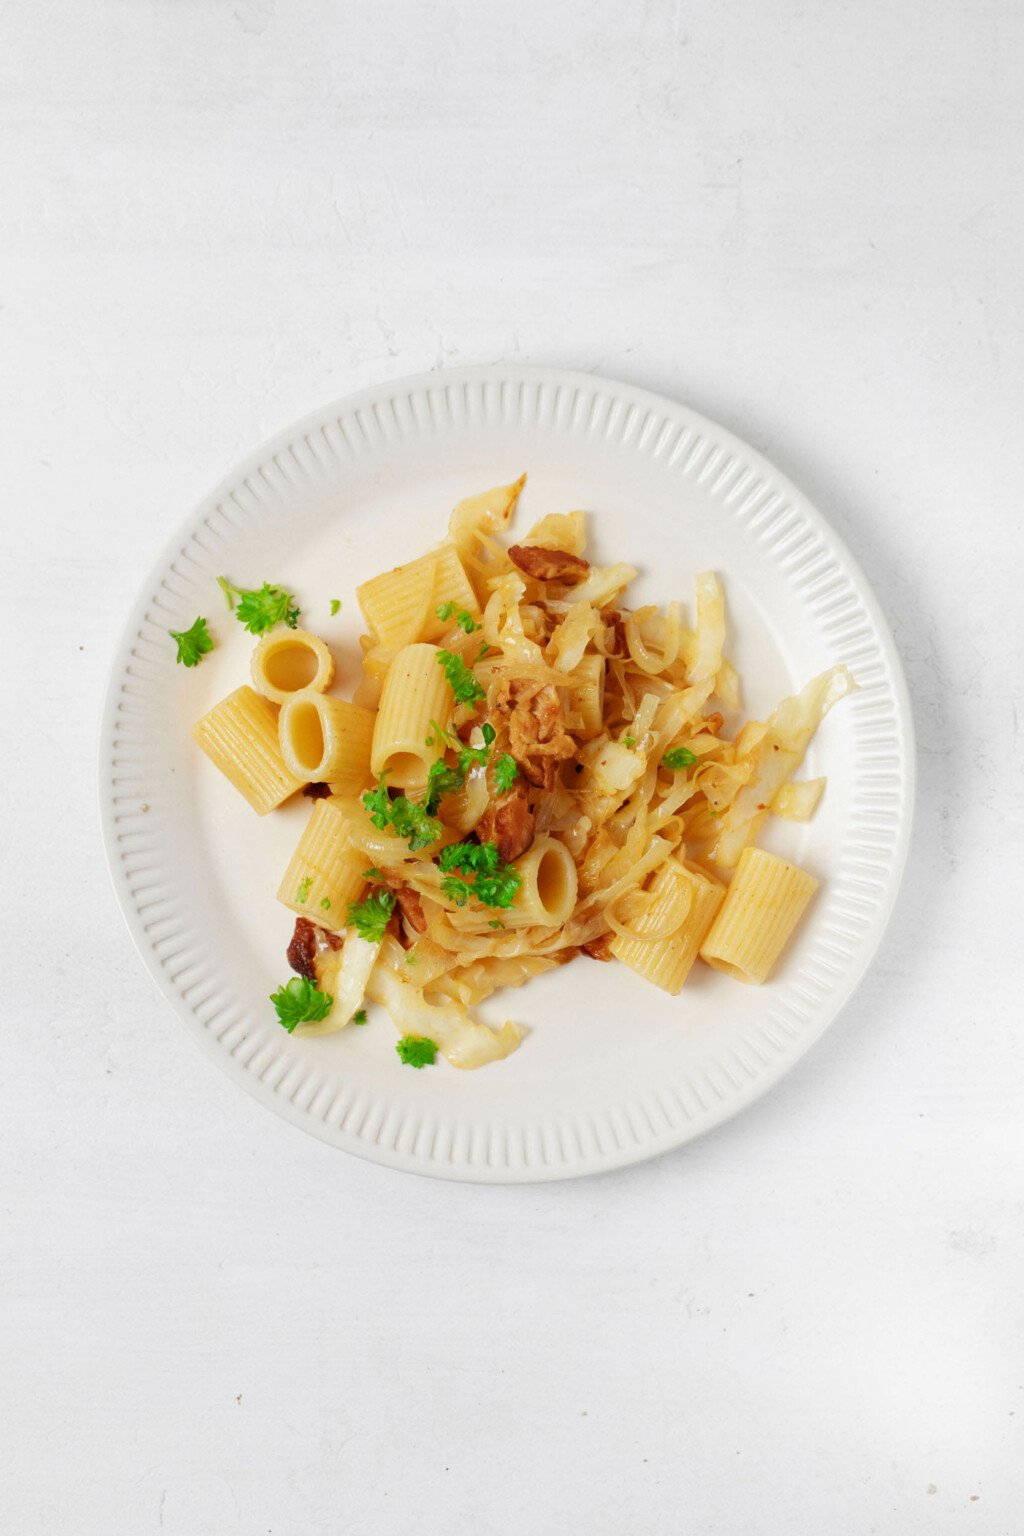 A plate of tube shaped pasta with caramelized cabbage and onion has been garnished with chopped green parsley.